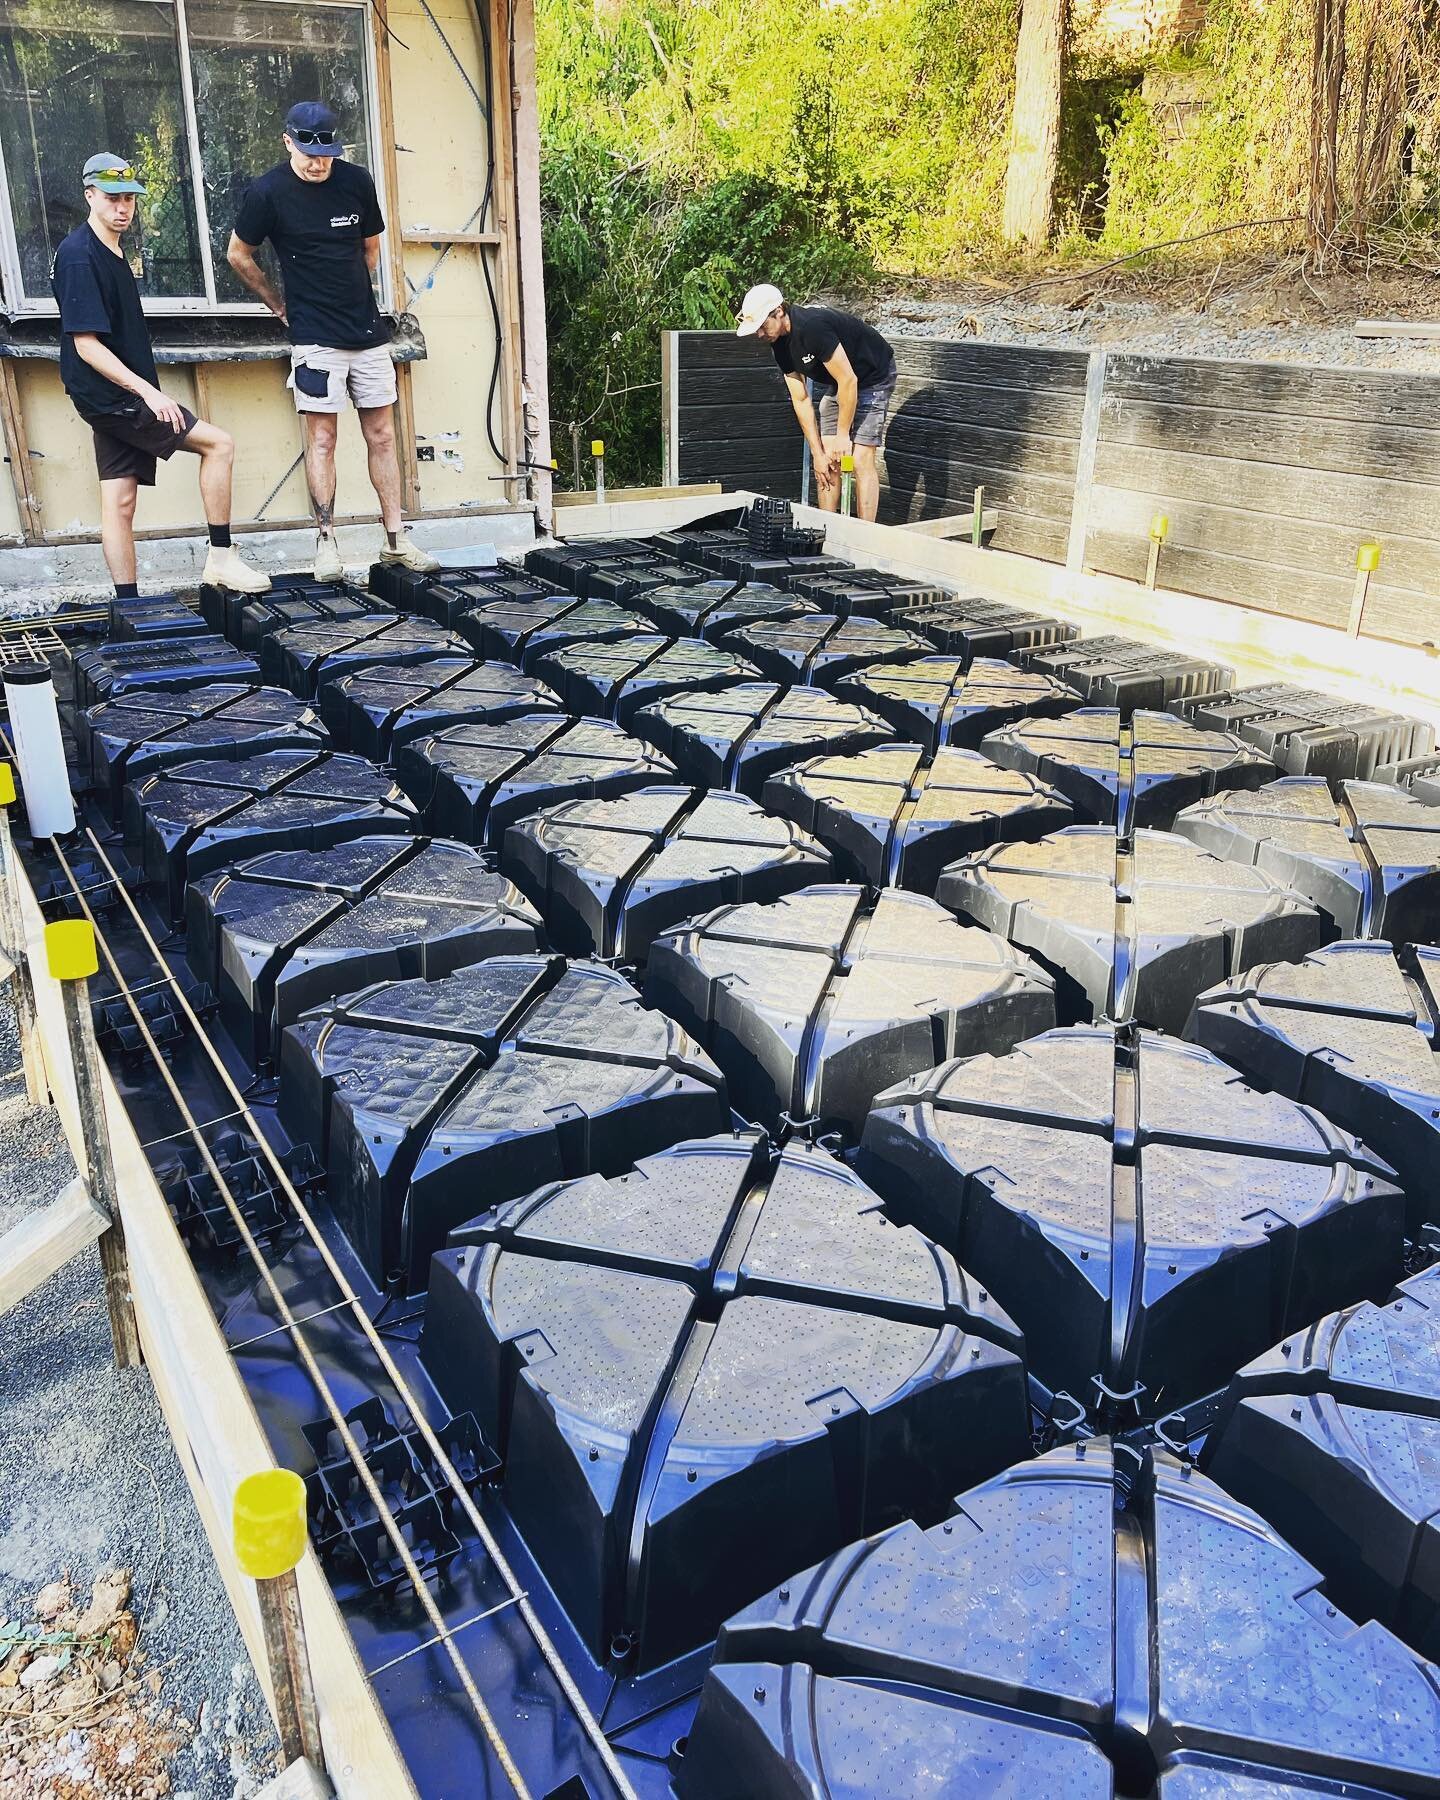 South coast decorative concrete supplies is very proud to announce we are now a distributor of the @biaxfoundations slab system. An innovative plastic pod slab system that is a direct replacement for EPS waffle pod slabs. Cost comparable to waffle po